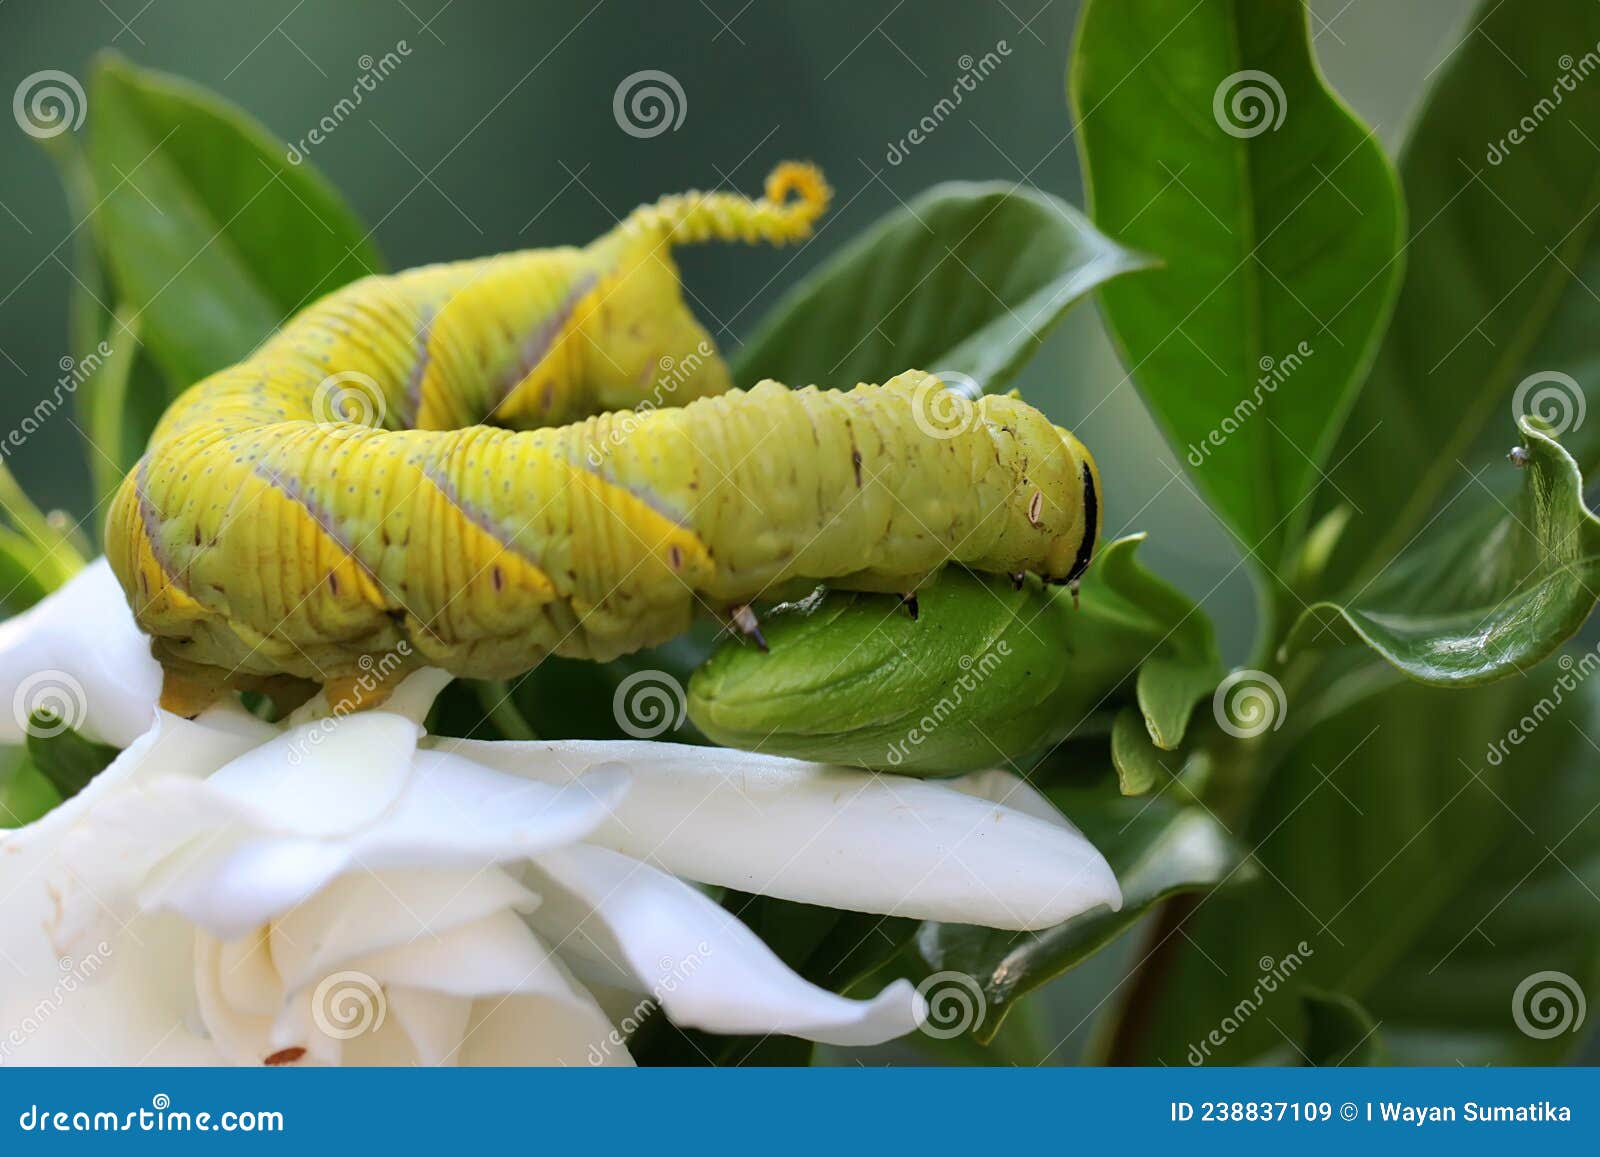 a tobacco hornworm is eating a wild flower.